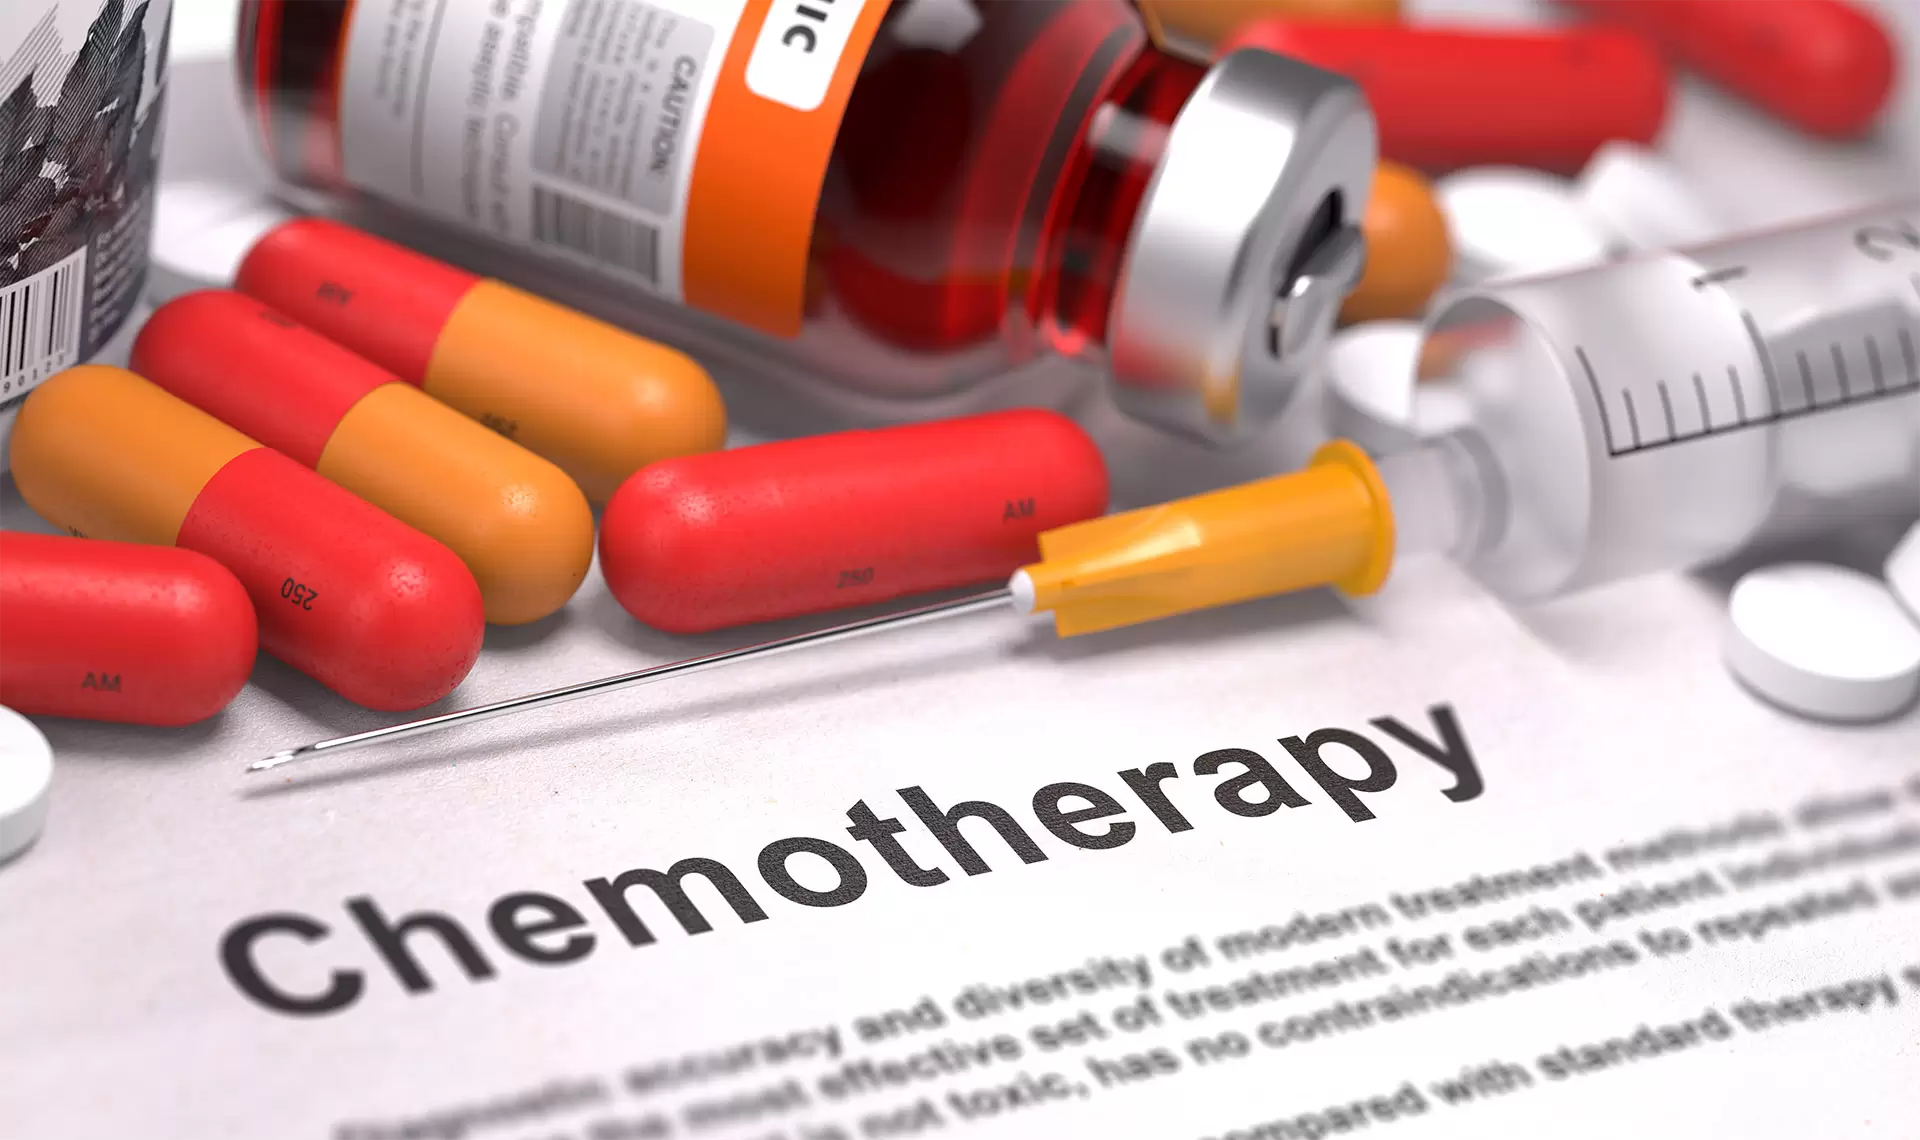 New Chemotherapy Drugs